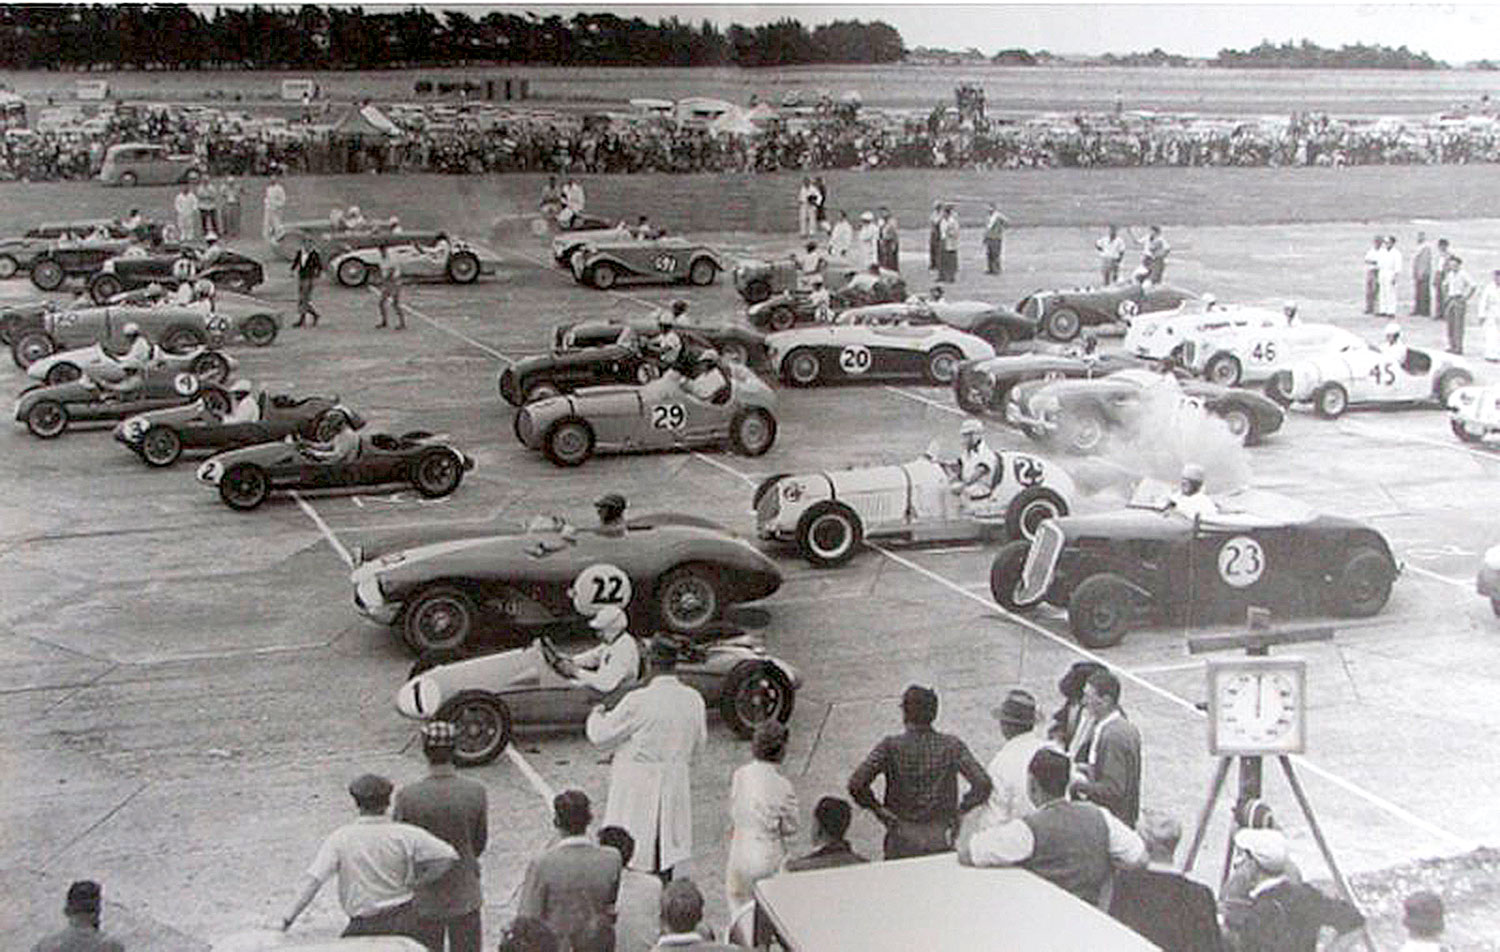 The start of the Selwyn Molesworth Trophy at Ohakea, 1956